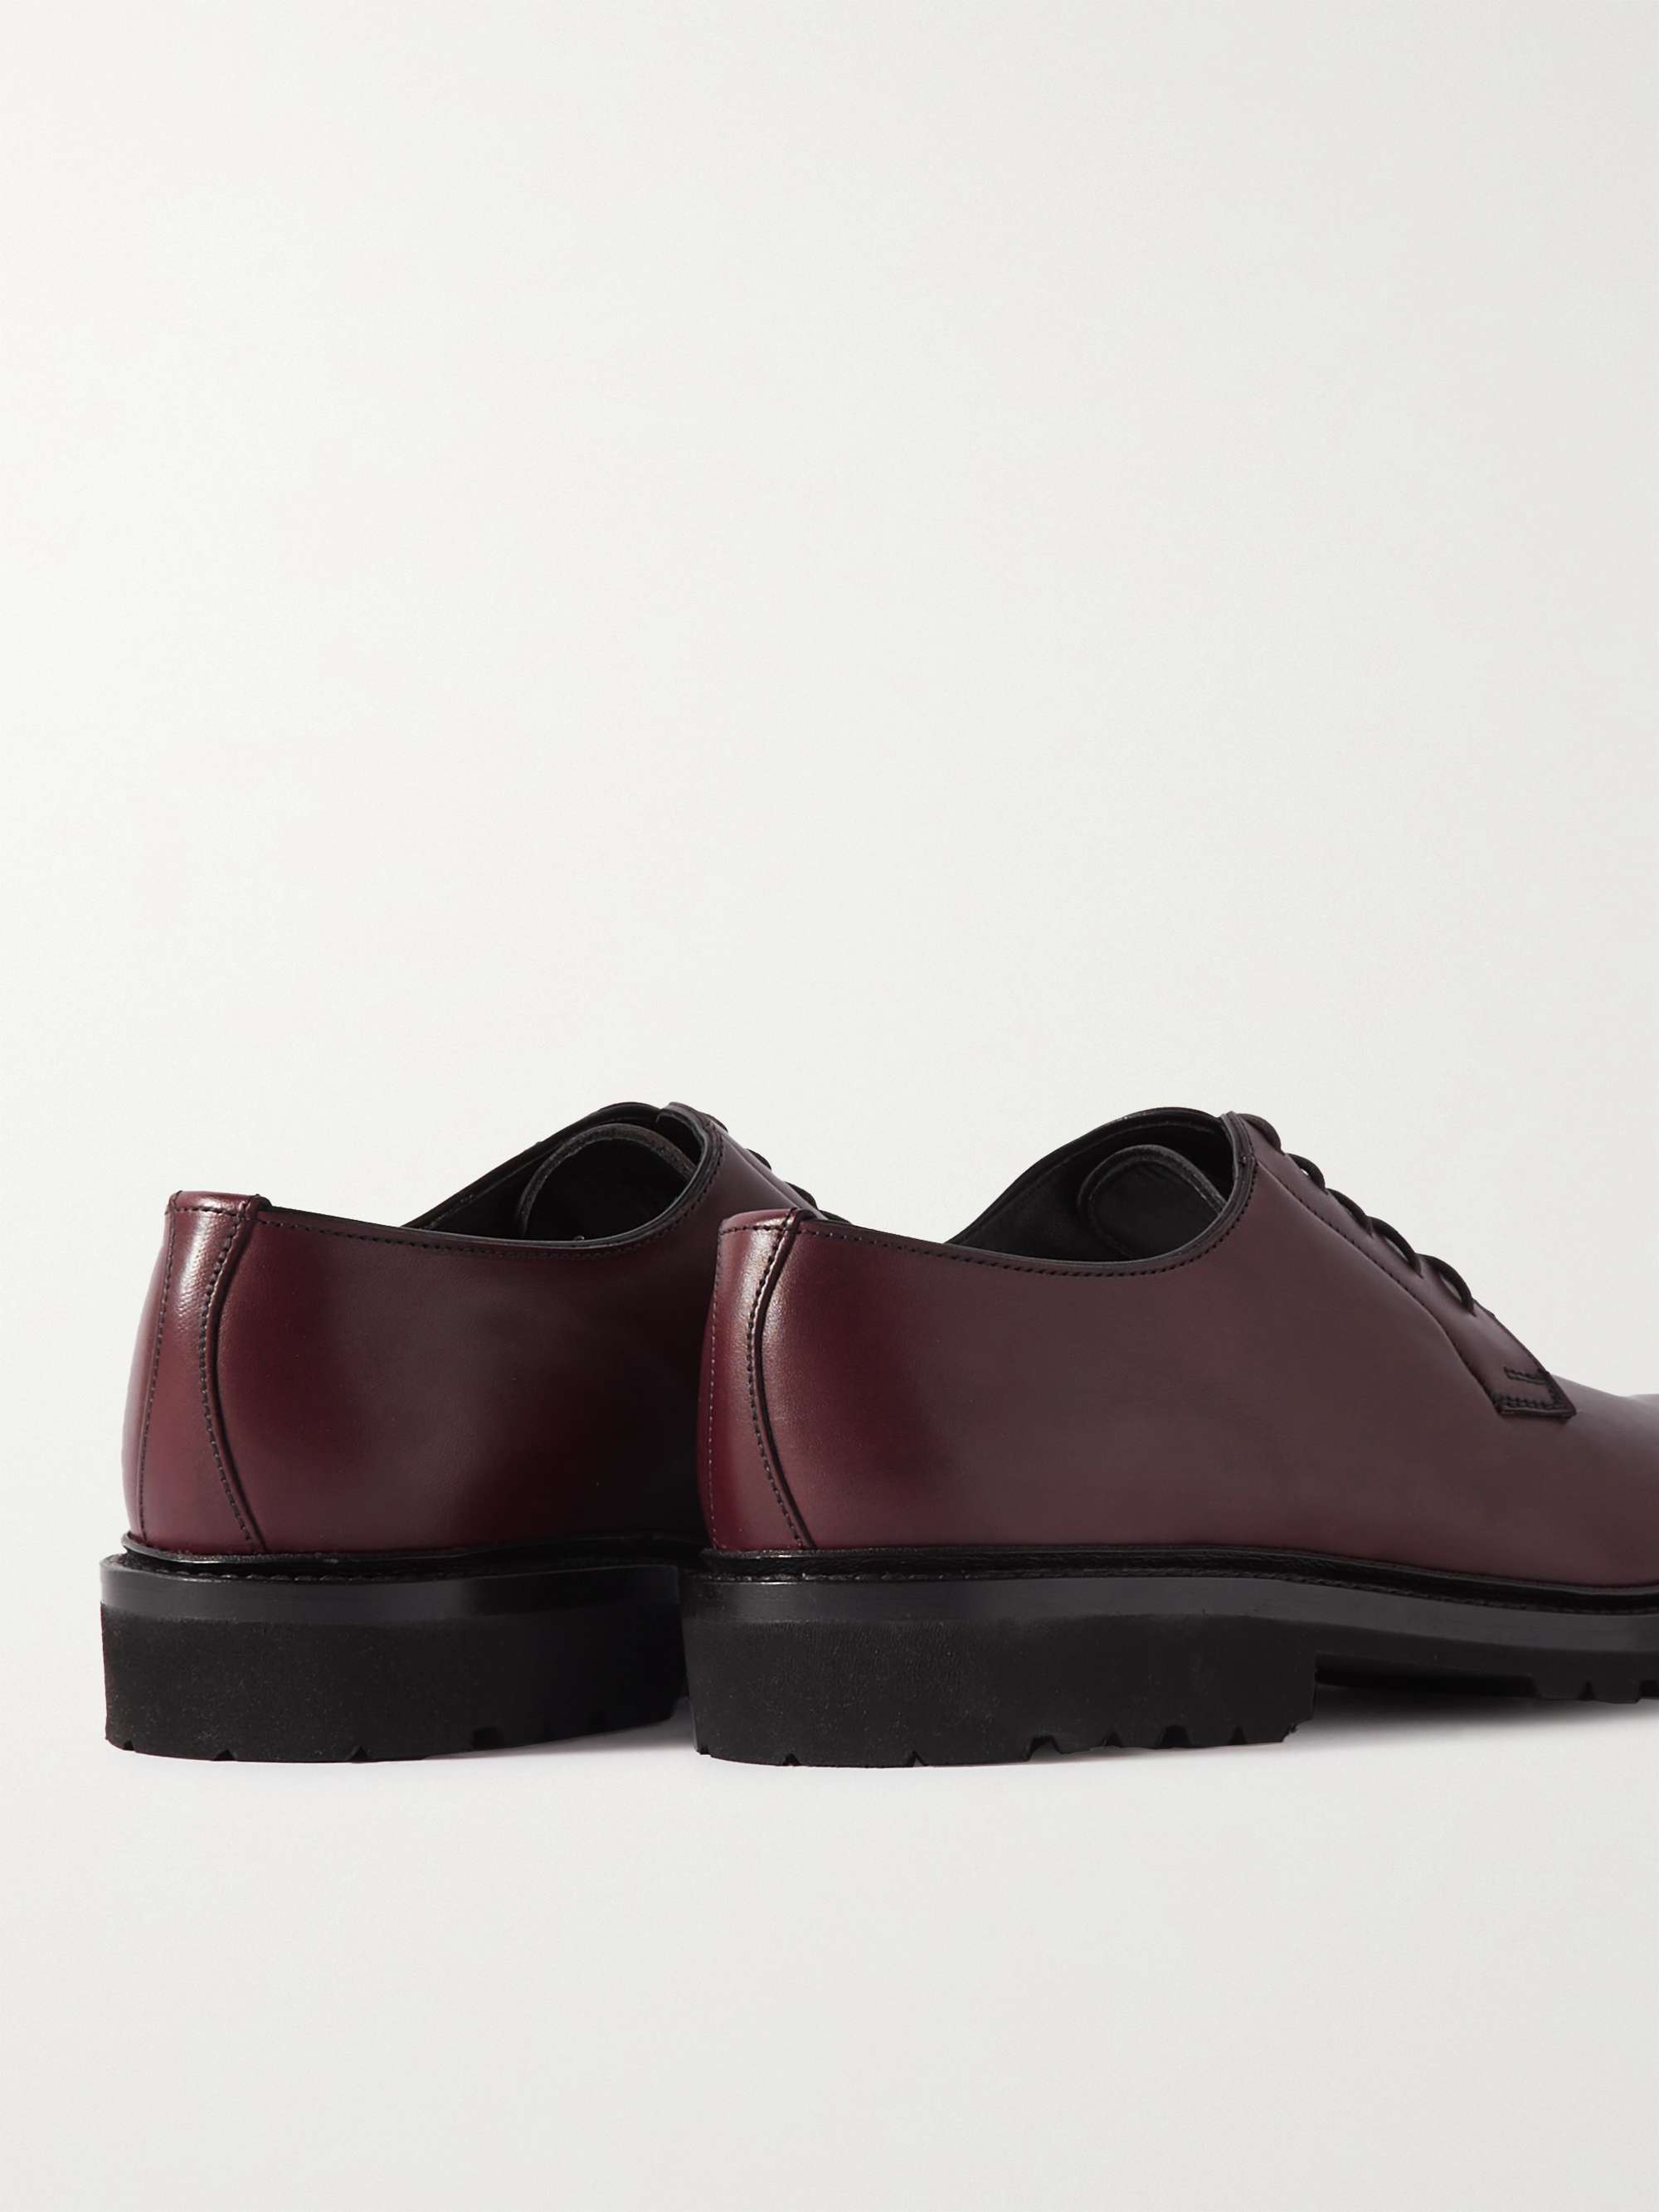 GEORGE CLEVERLEY Archie Leather Derby Shoes